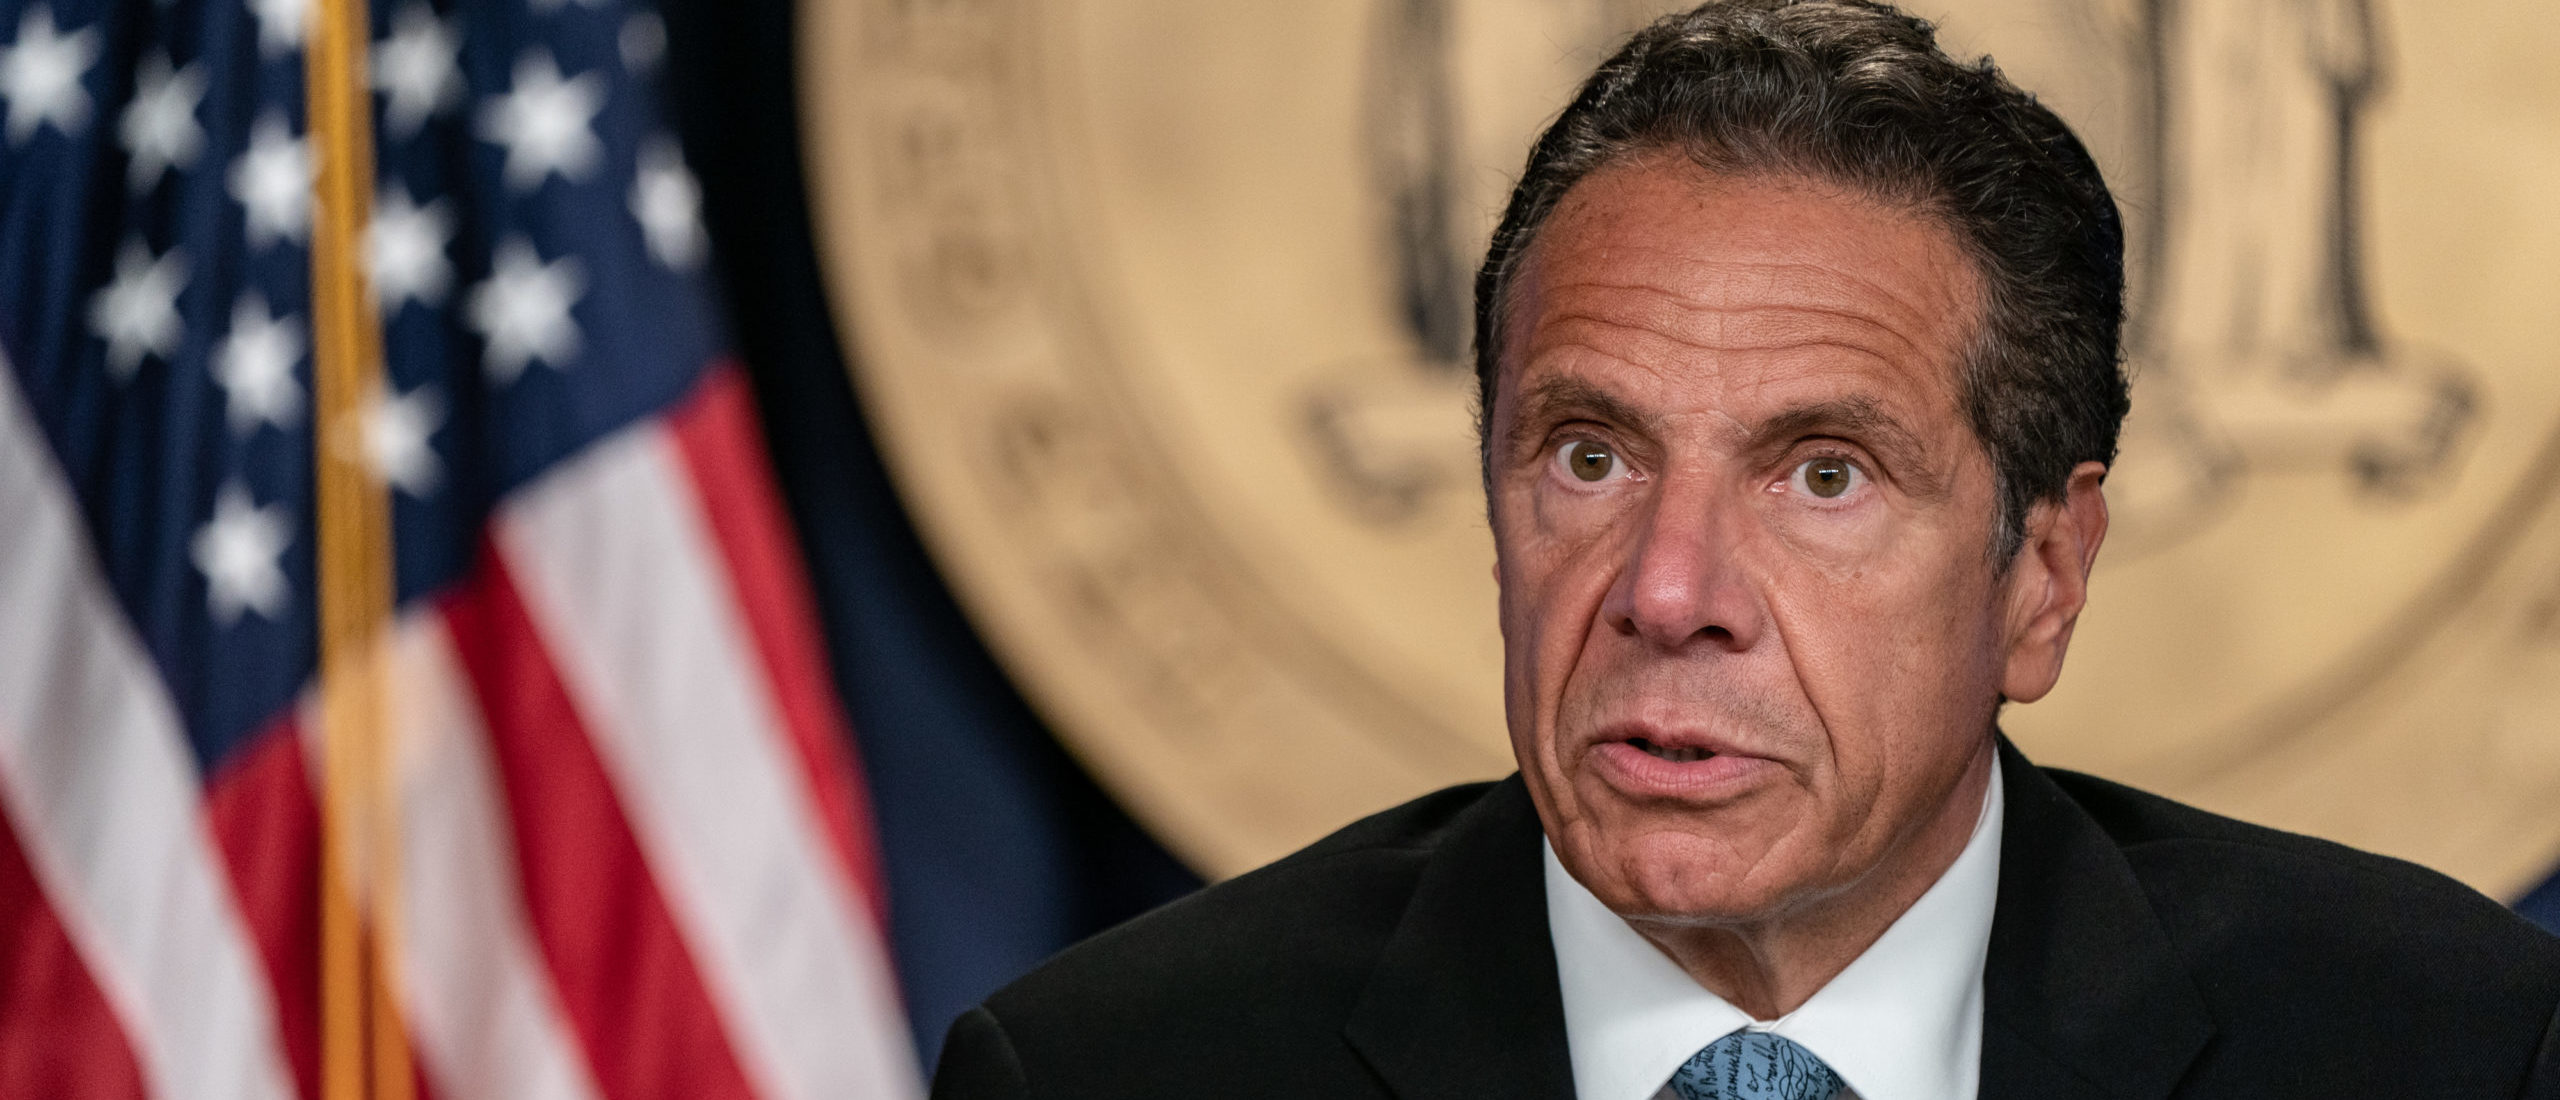 New York Gov. Andrew Cuomo speaks during the daily media briefing at the Office of the Governor of the State of New York on July 23, 2020 in New York City. (Photo by Jeenah Moon/Getty Images)